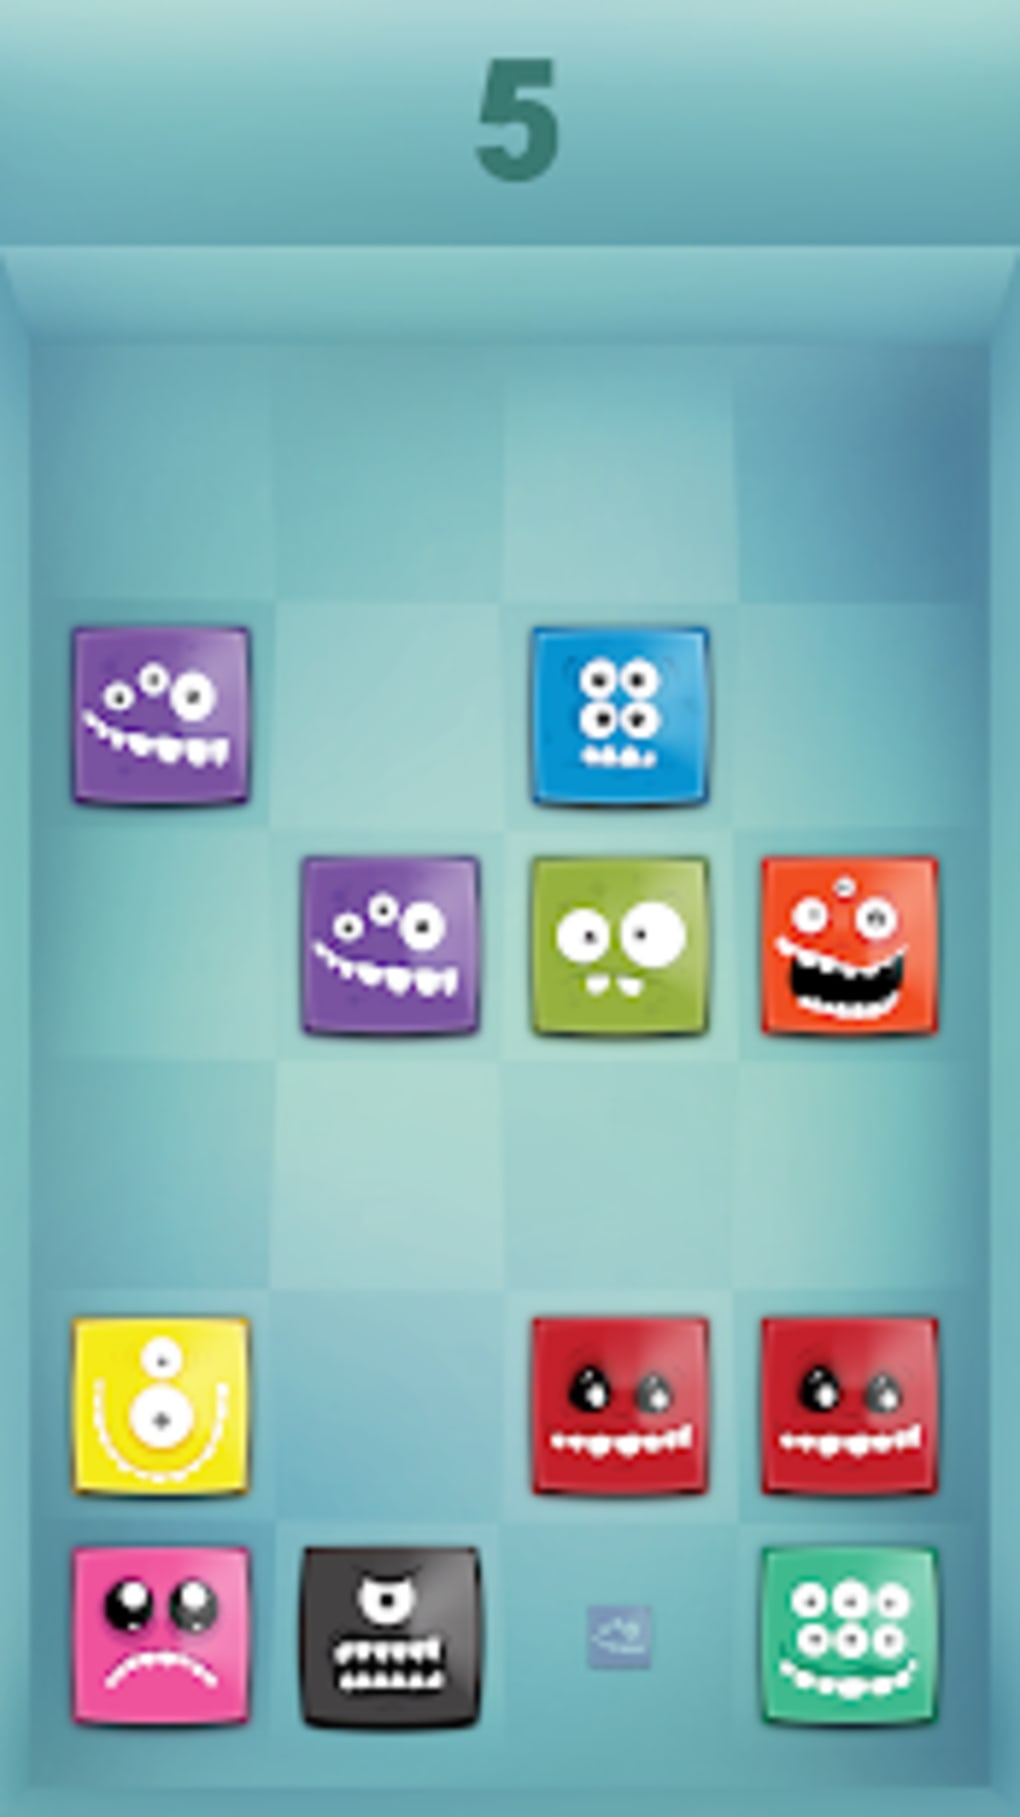 Psychos Tap - Crazy Monsters APK for Android - Download